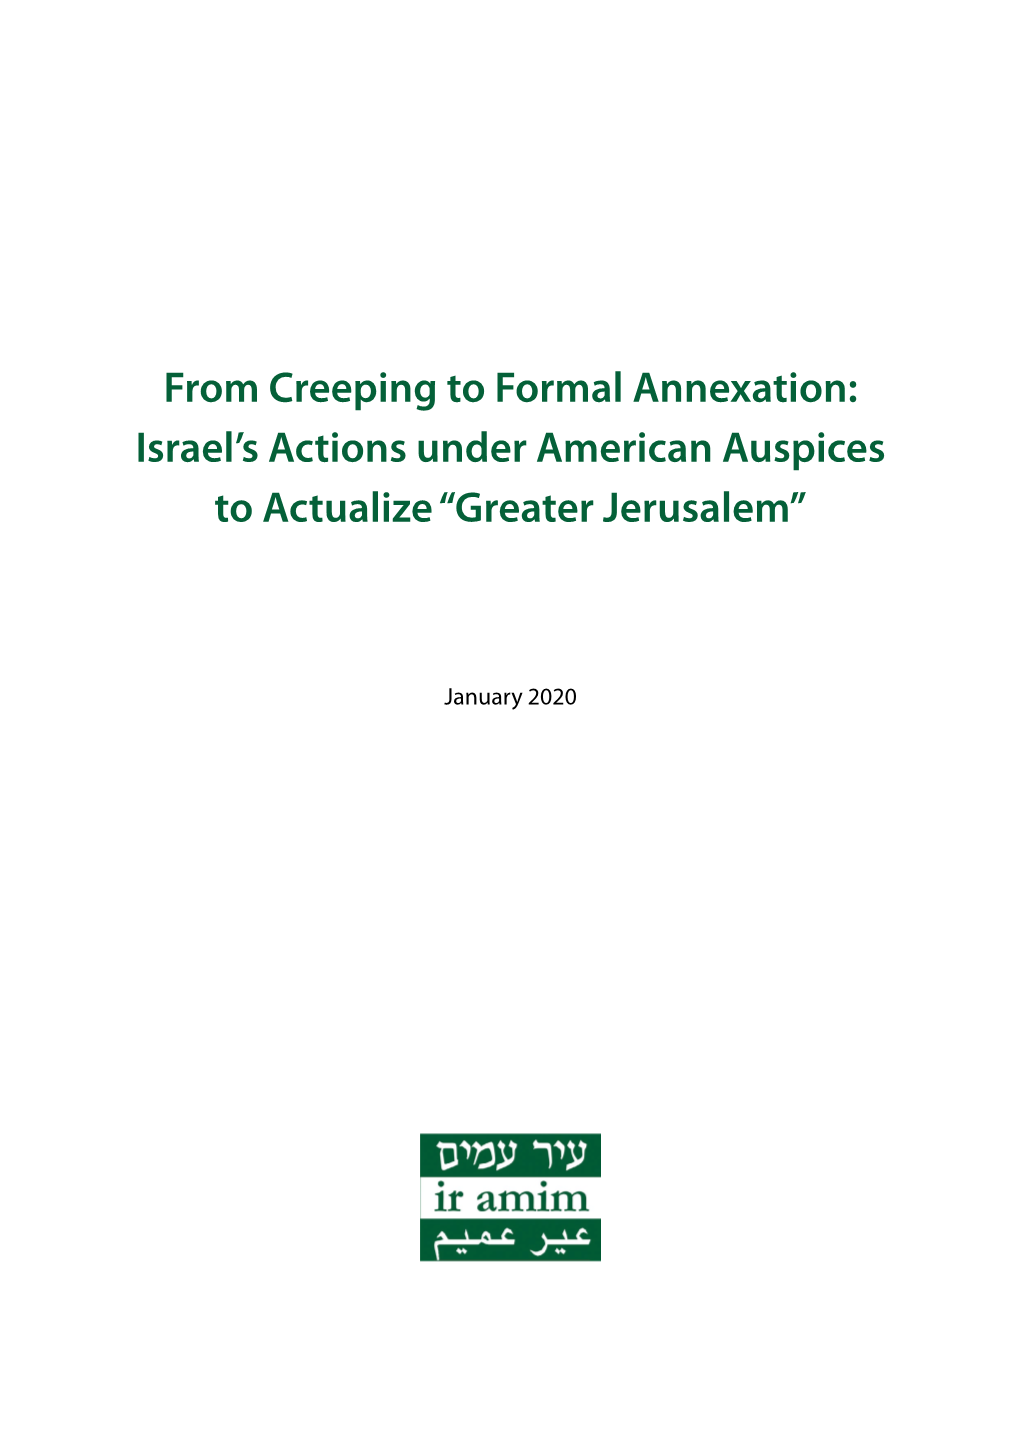 From Creeping to Formal Annexation: Israel's Actions Under American Auspices to Actualize “Greater Jerusalem”